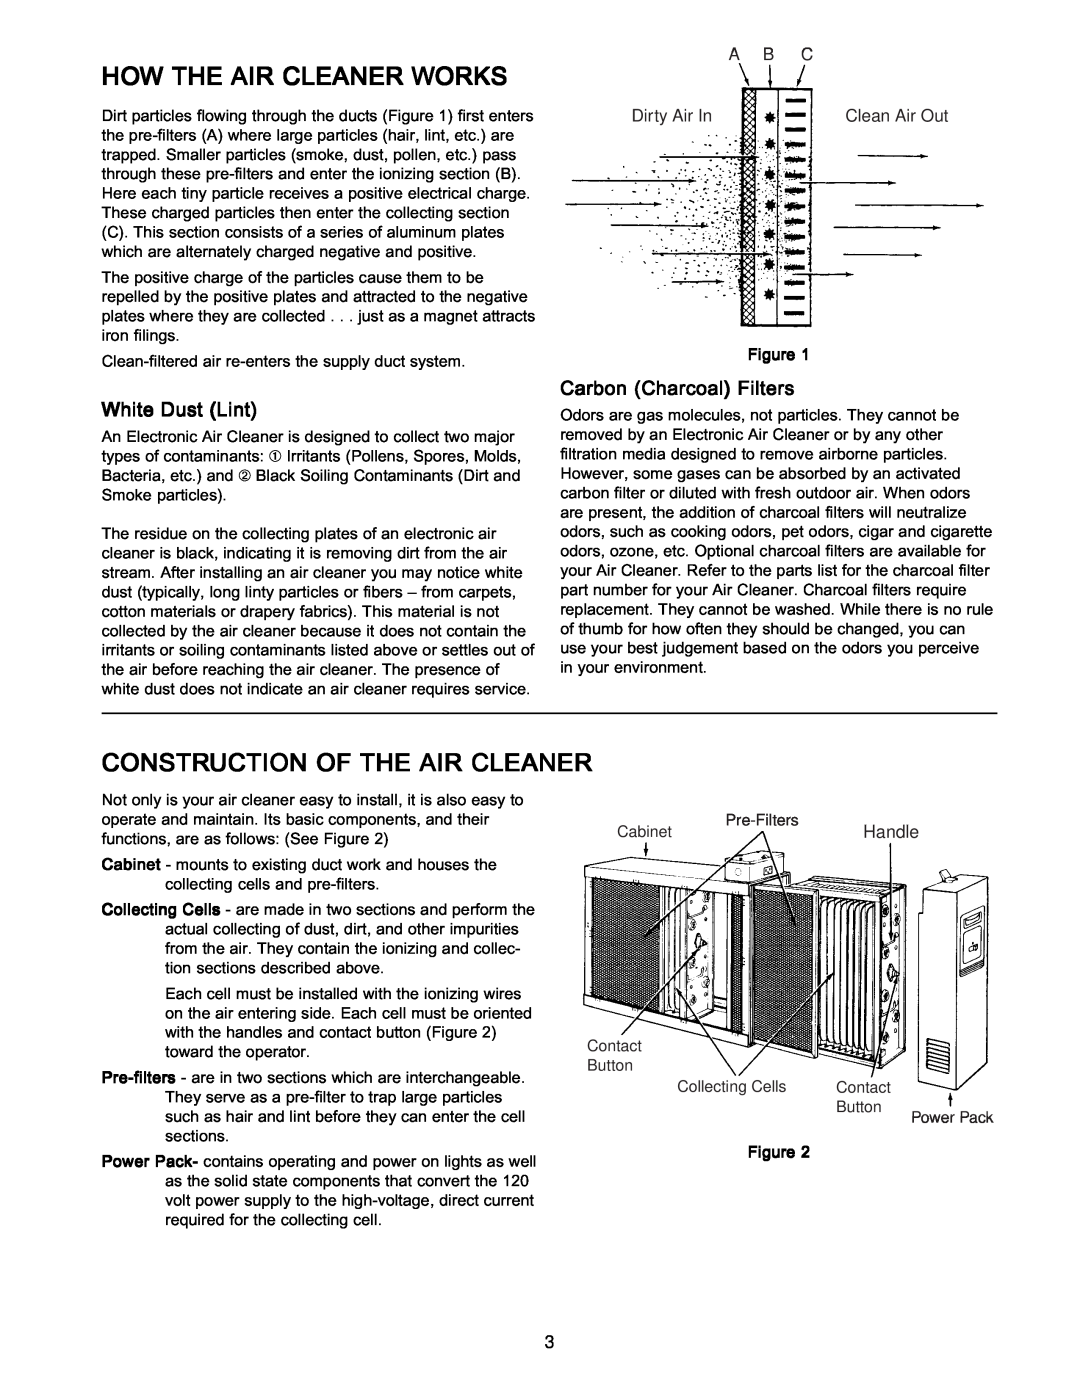 Emerson SST1600 manual How The Air Cleaner Works, Construction Of The Air Cleaner, White Dust Lint, Carbon Charcoal Filters 